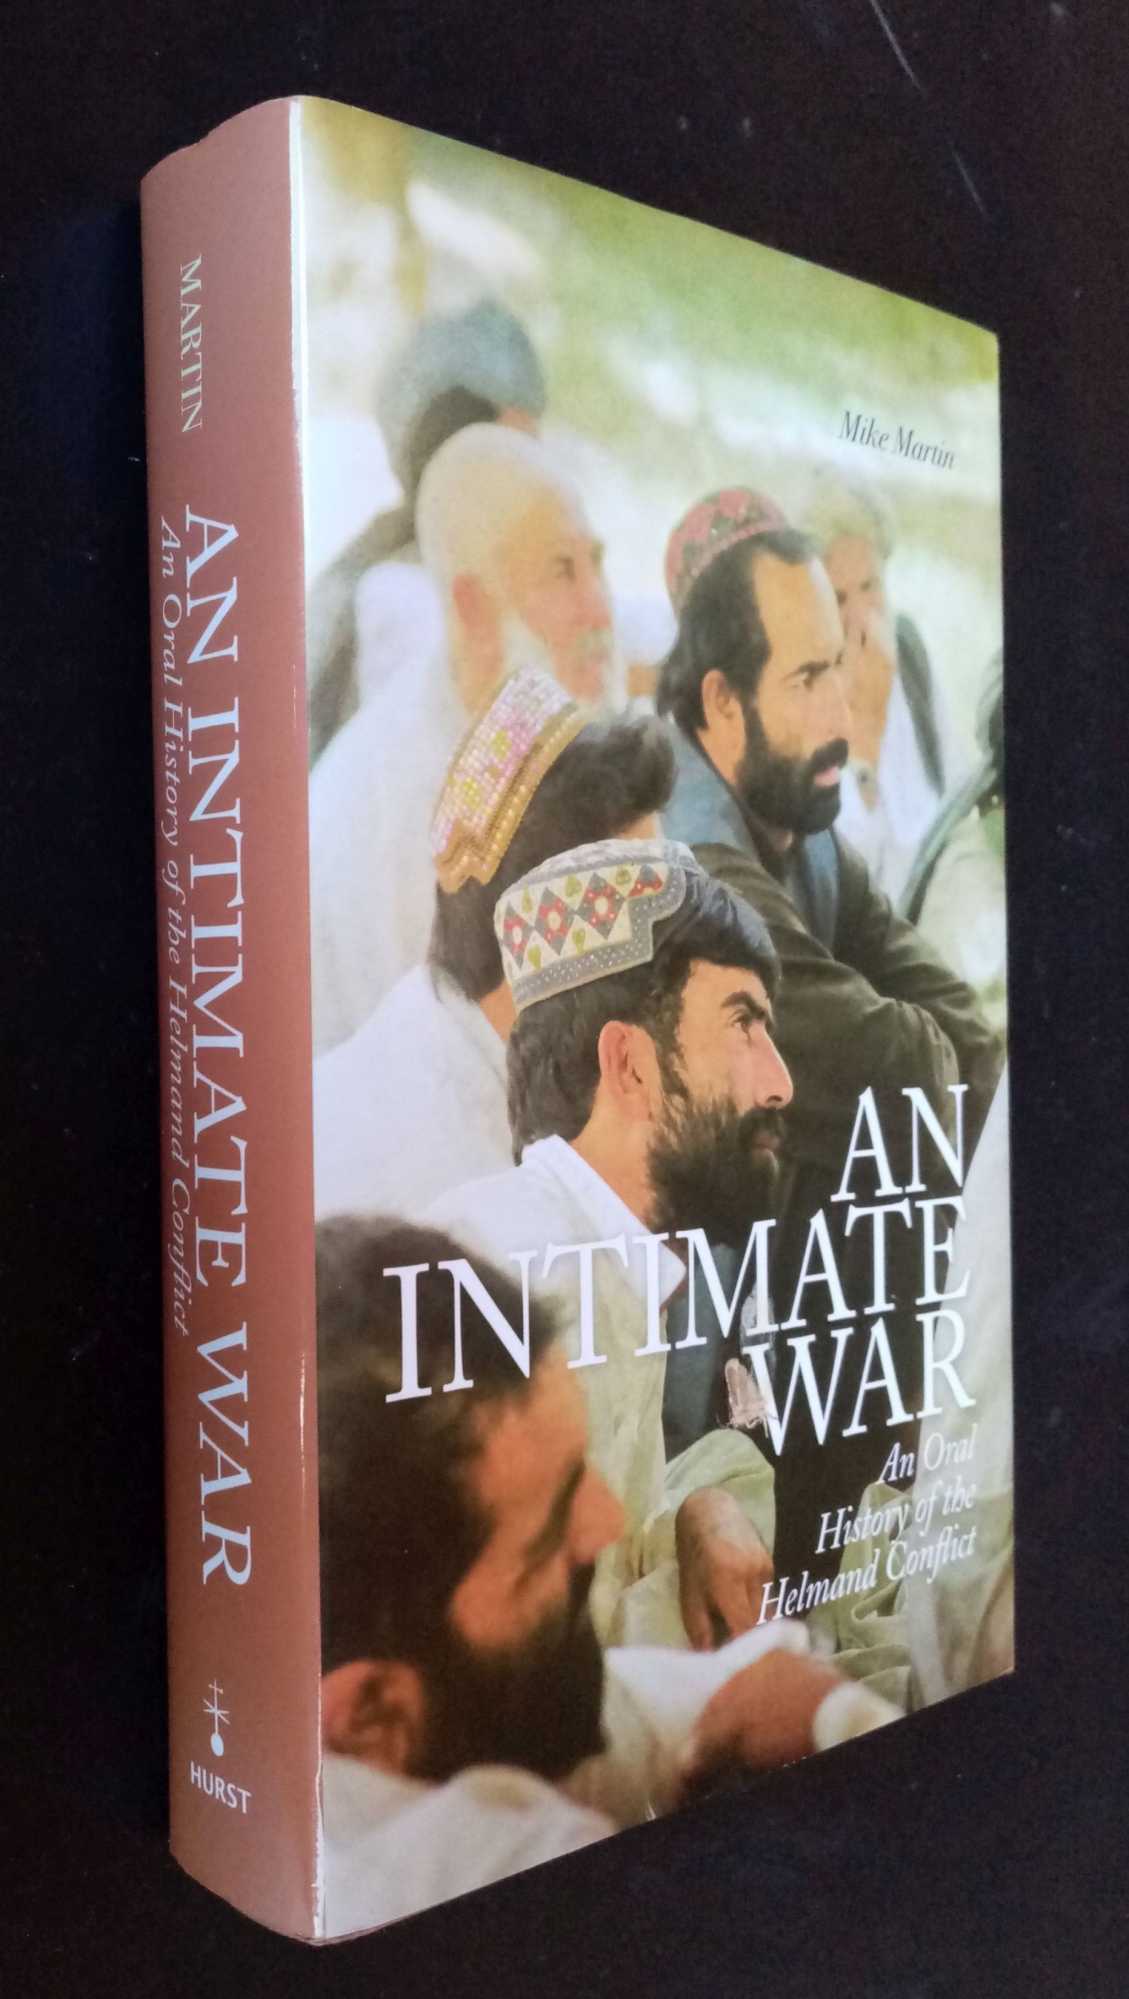 Mike Martin - An Intimate War: An Oral History of the Helmand Conflict